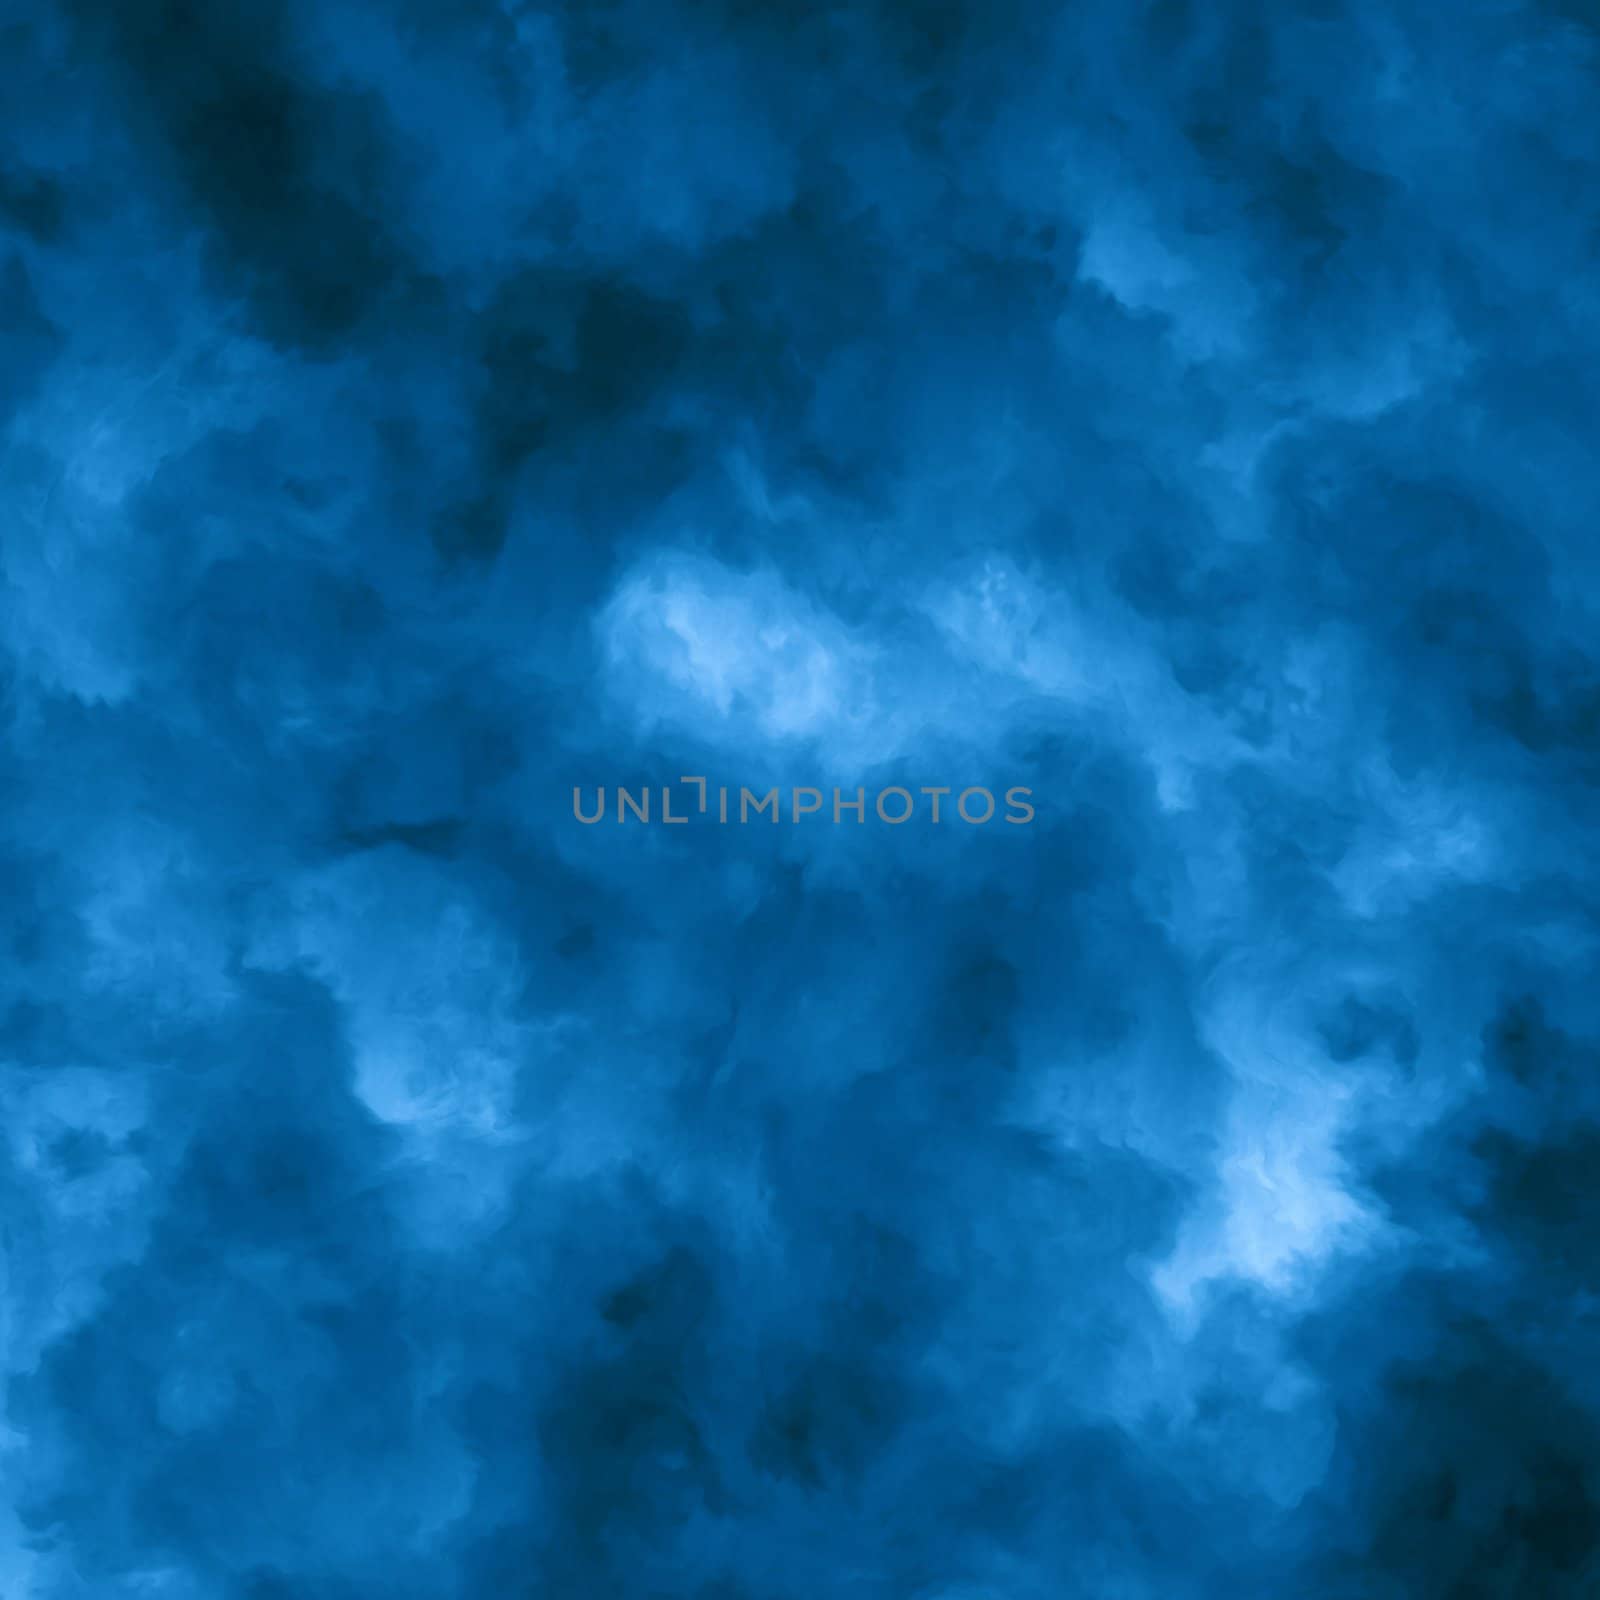 Brooding, abstract blue background composed of indistinct cloud shapes. Blue color ranges from dark to light blue. 